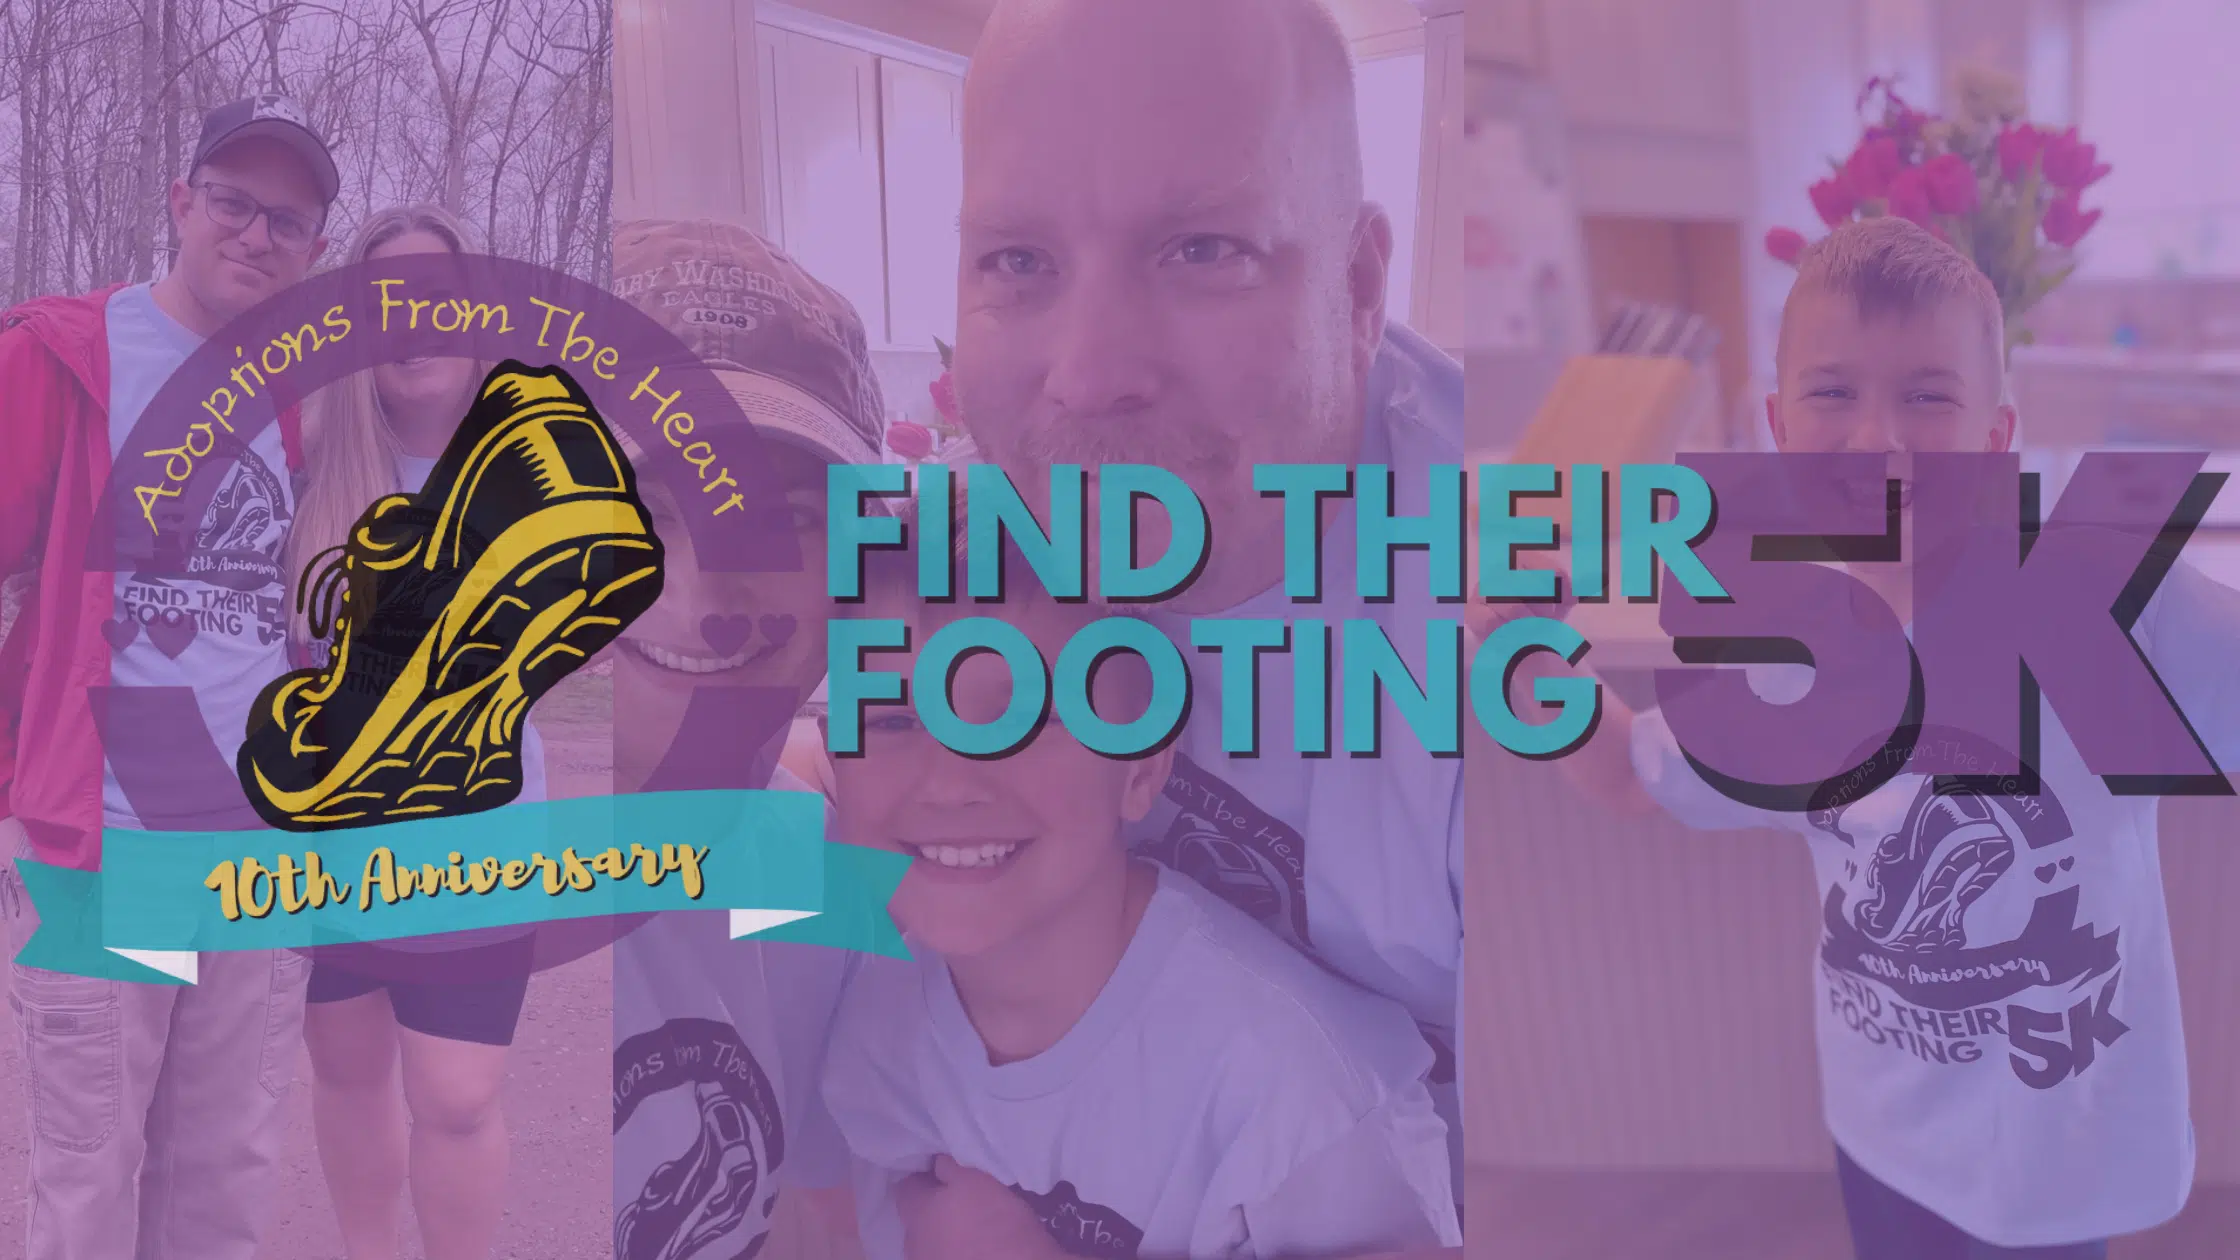 Event Recap: Find Their Footing 5k